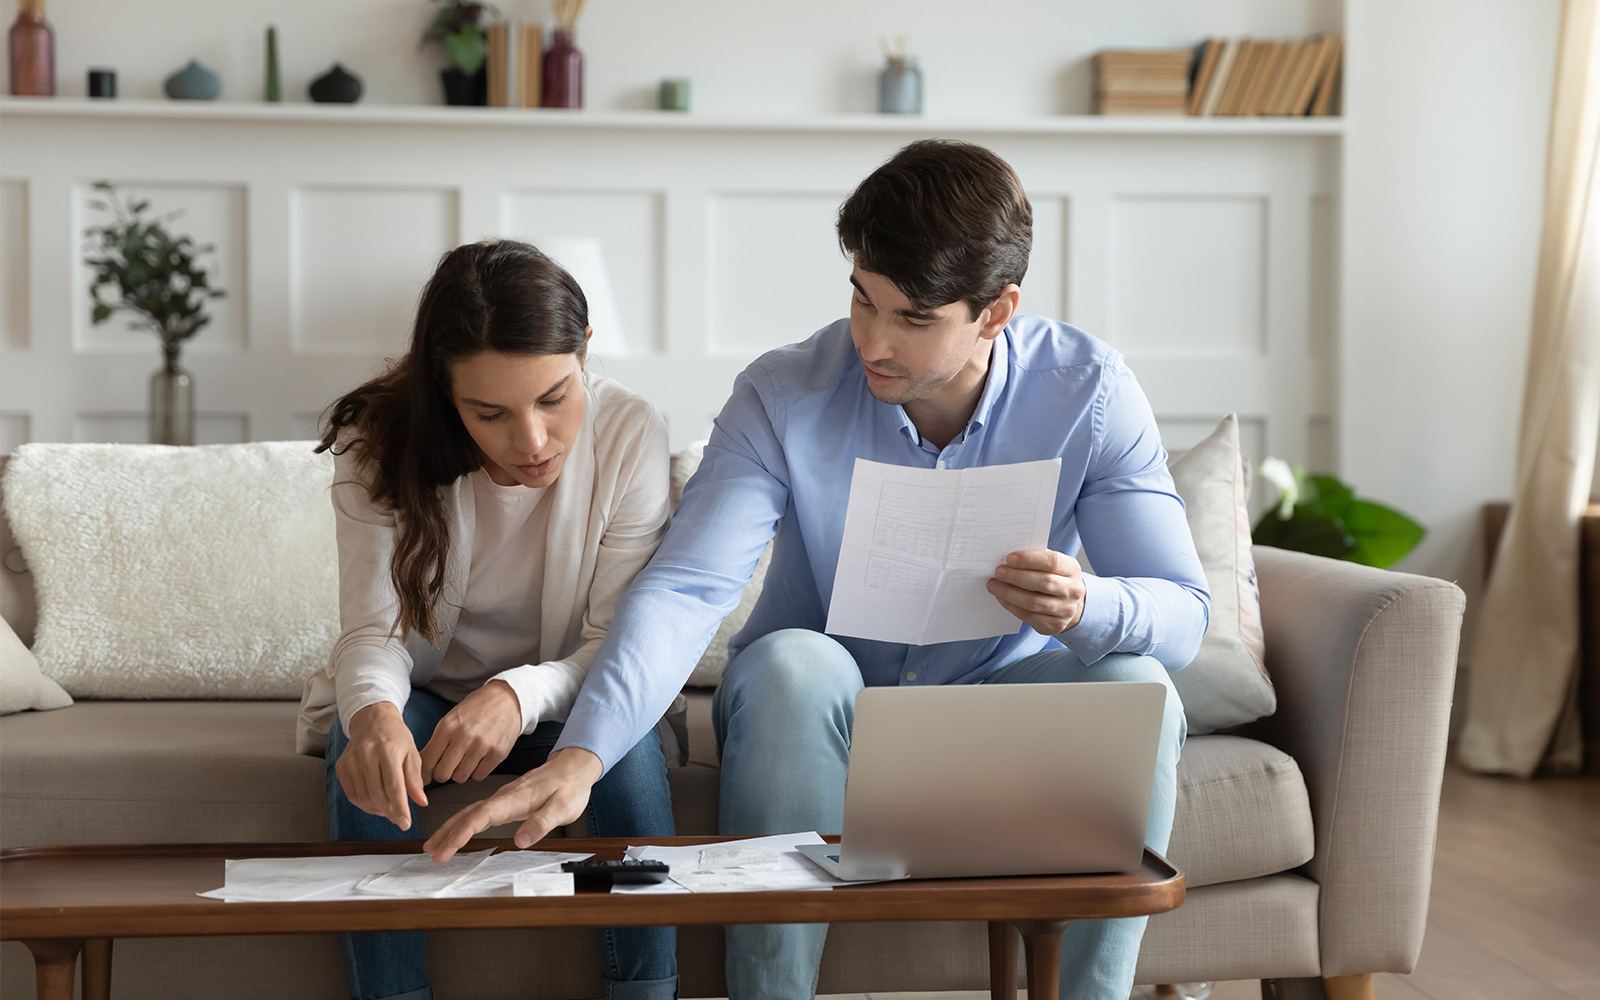 Concentrated spouses sitting on couch at home discussing with laptop and calculator